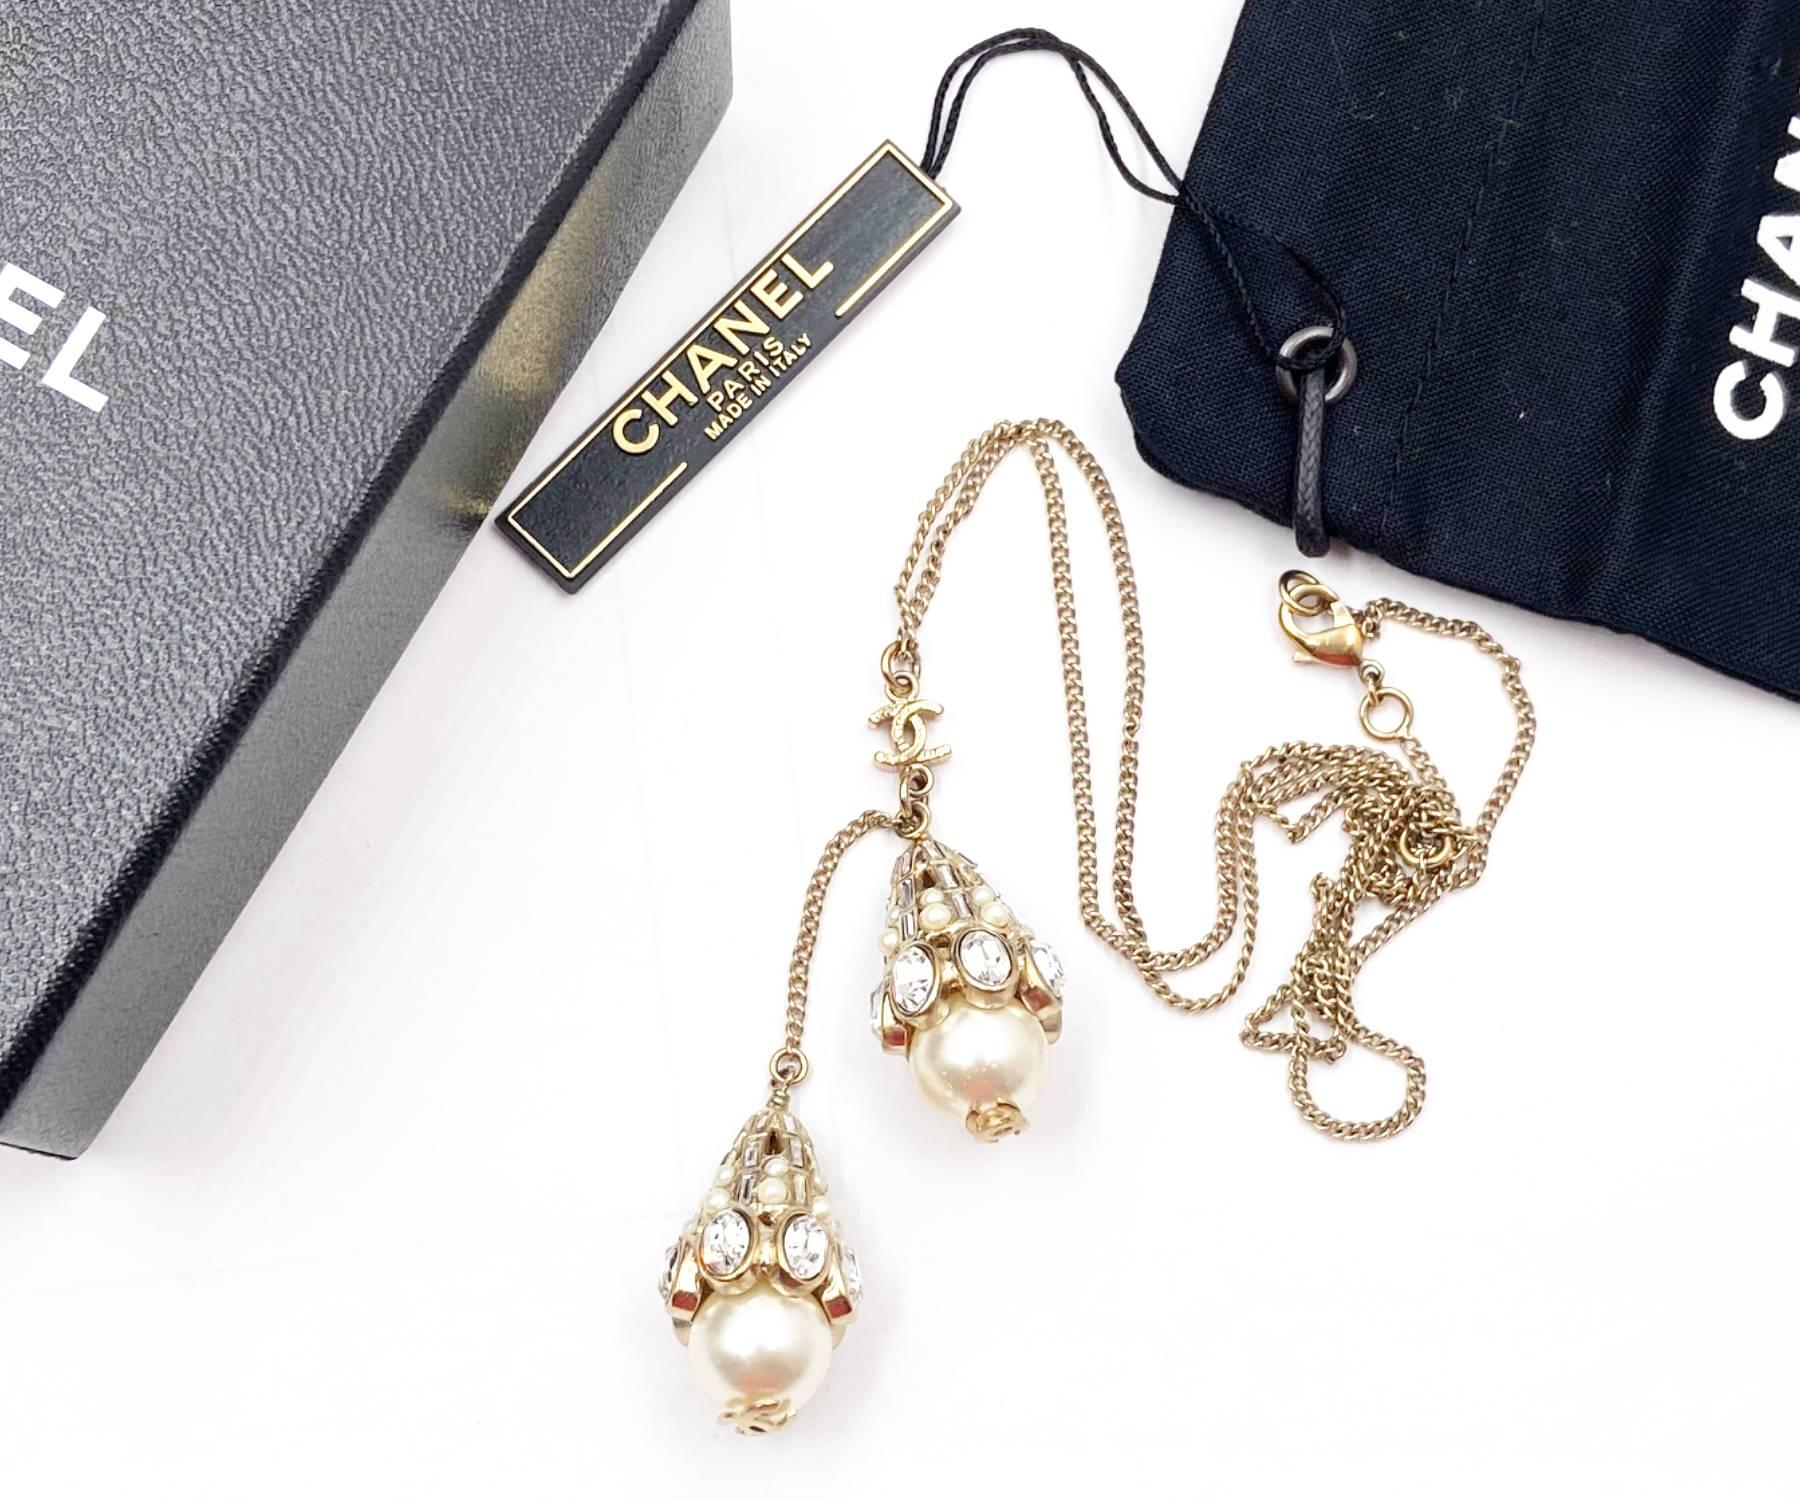 Chanel Rare Gold CC Crystal Pearl Tear Drops Necklace

* Marked 13
* Made in Italy
* Comes with the original box and dustbag

-Tassel part is approximately 3″ long total.
-The chain is approximately 16″ to 22″.
-Very unique and rare
-In a good